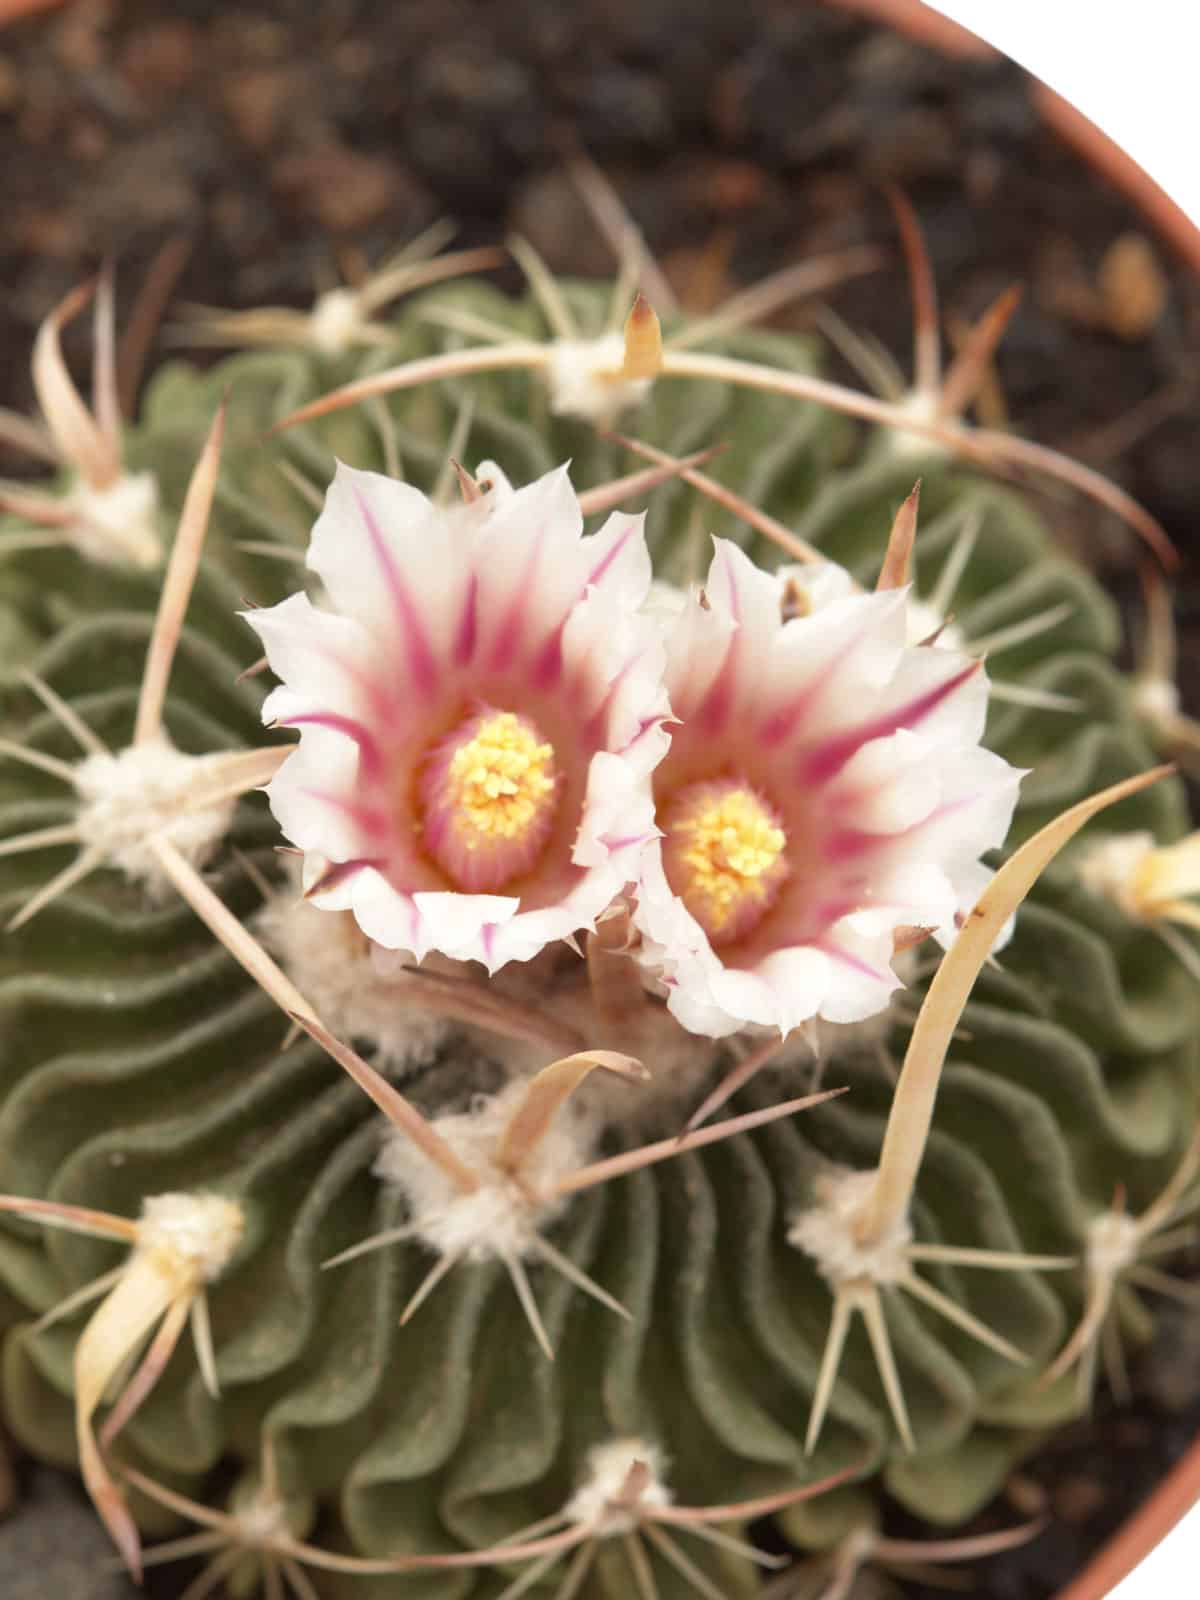 Stunning white and pink flowers of a Brain Cactus